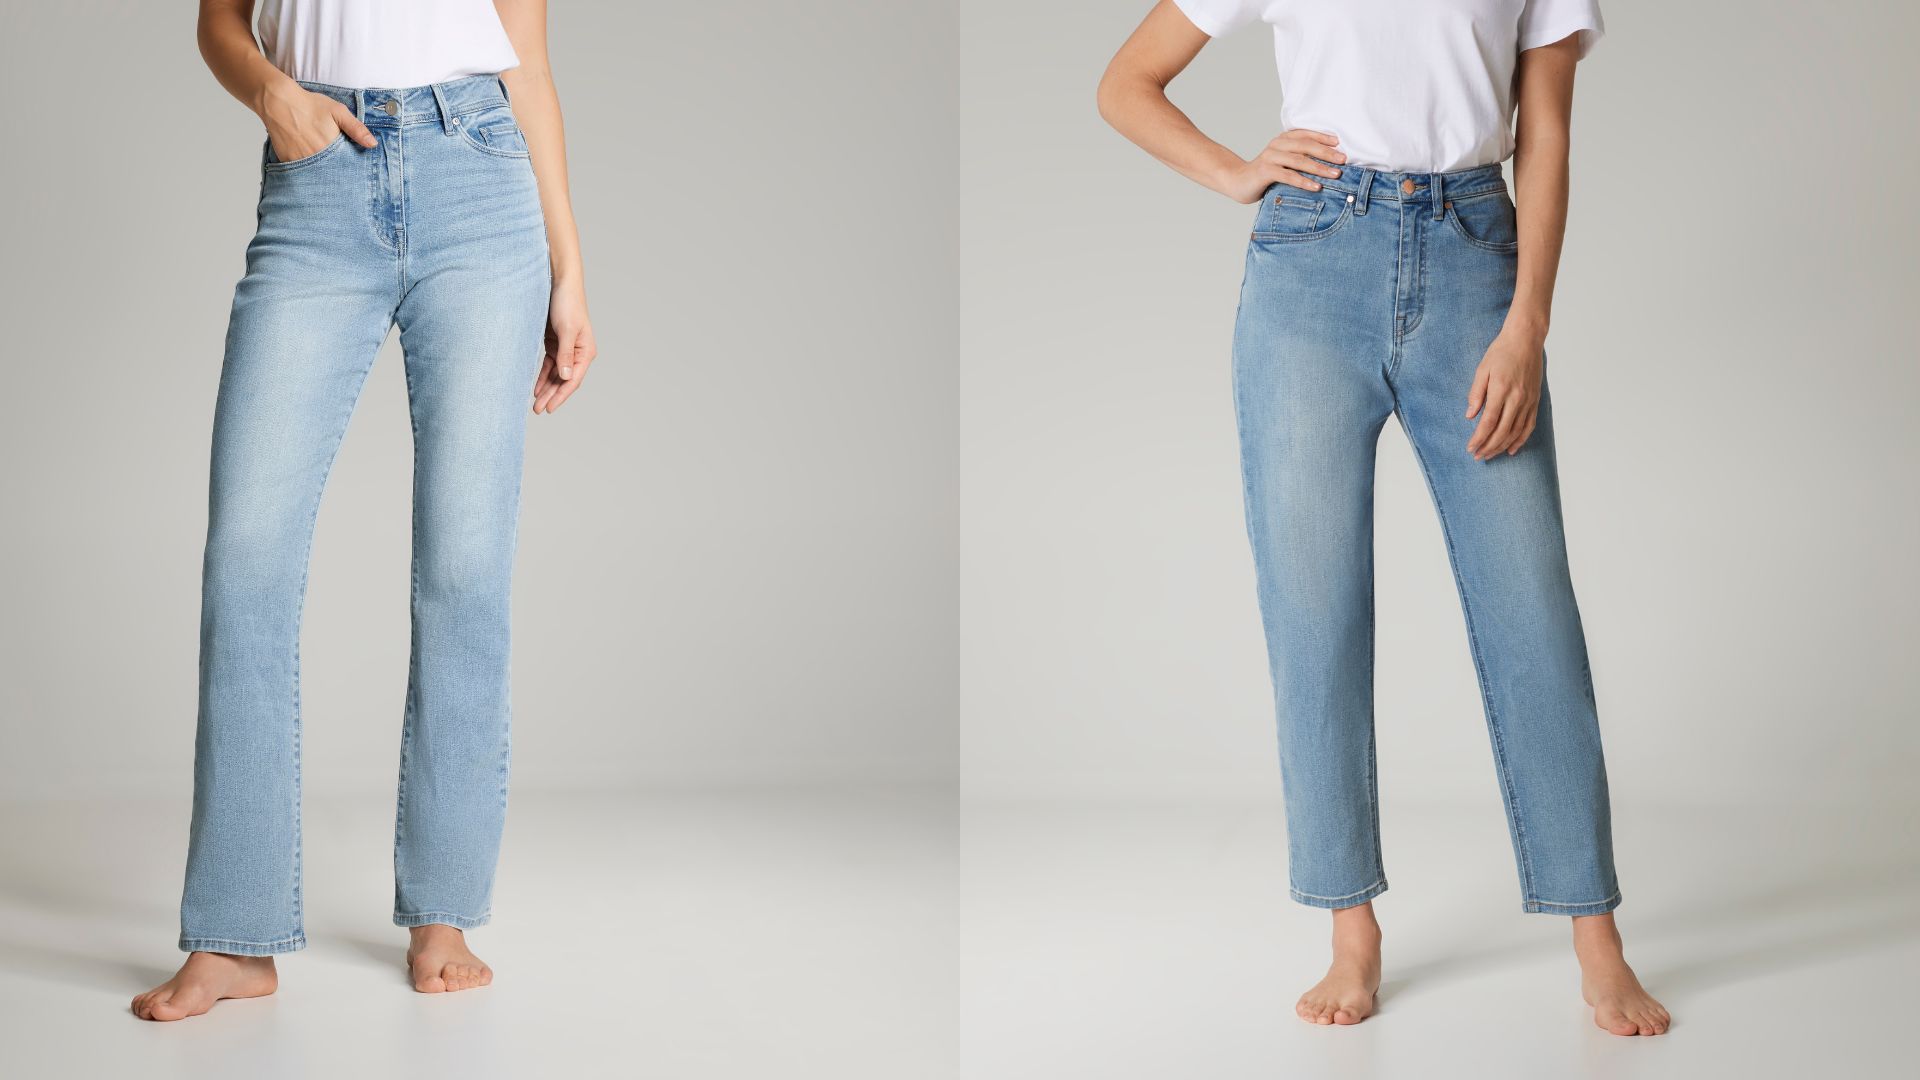 Women's Pant Fit Guide